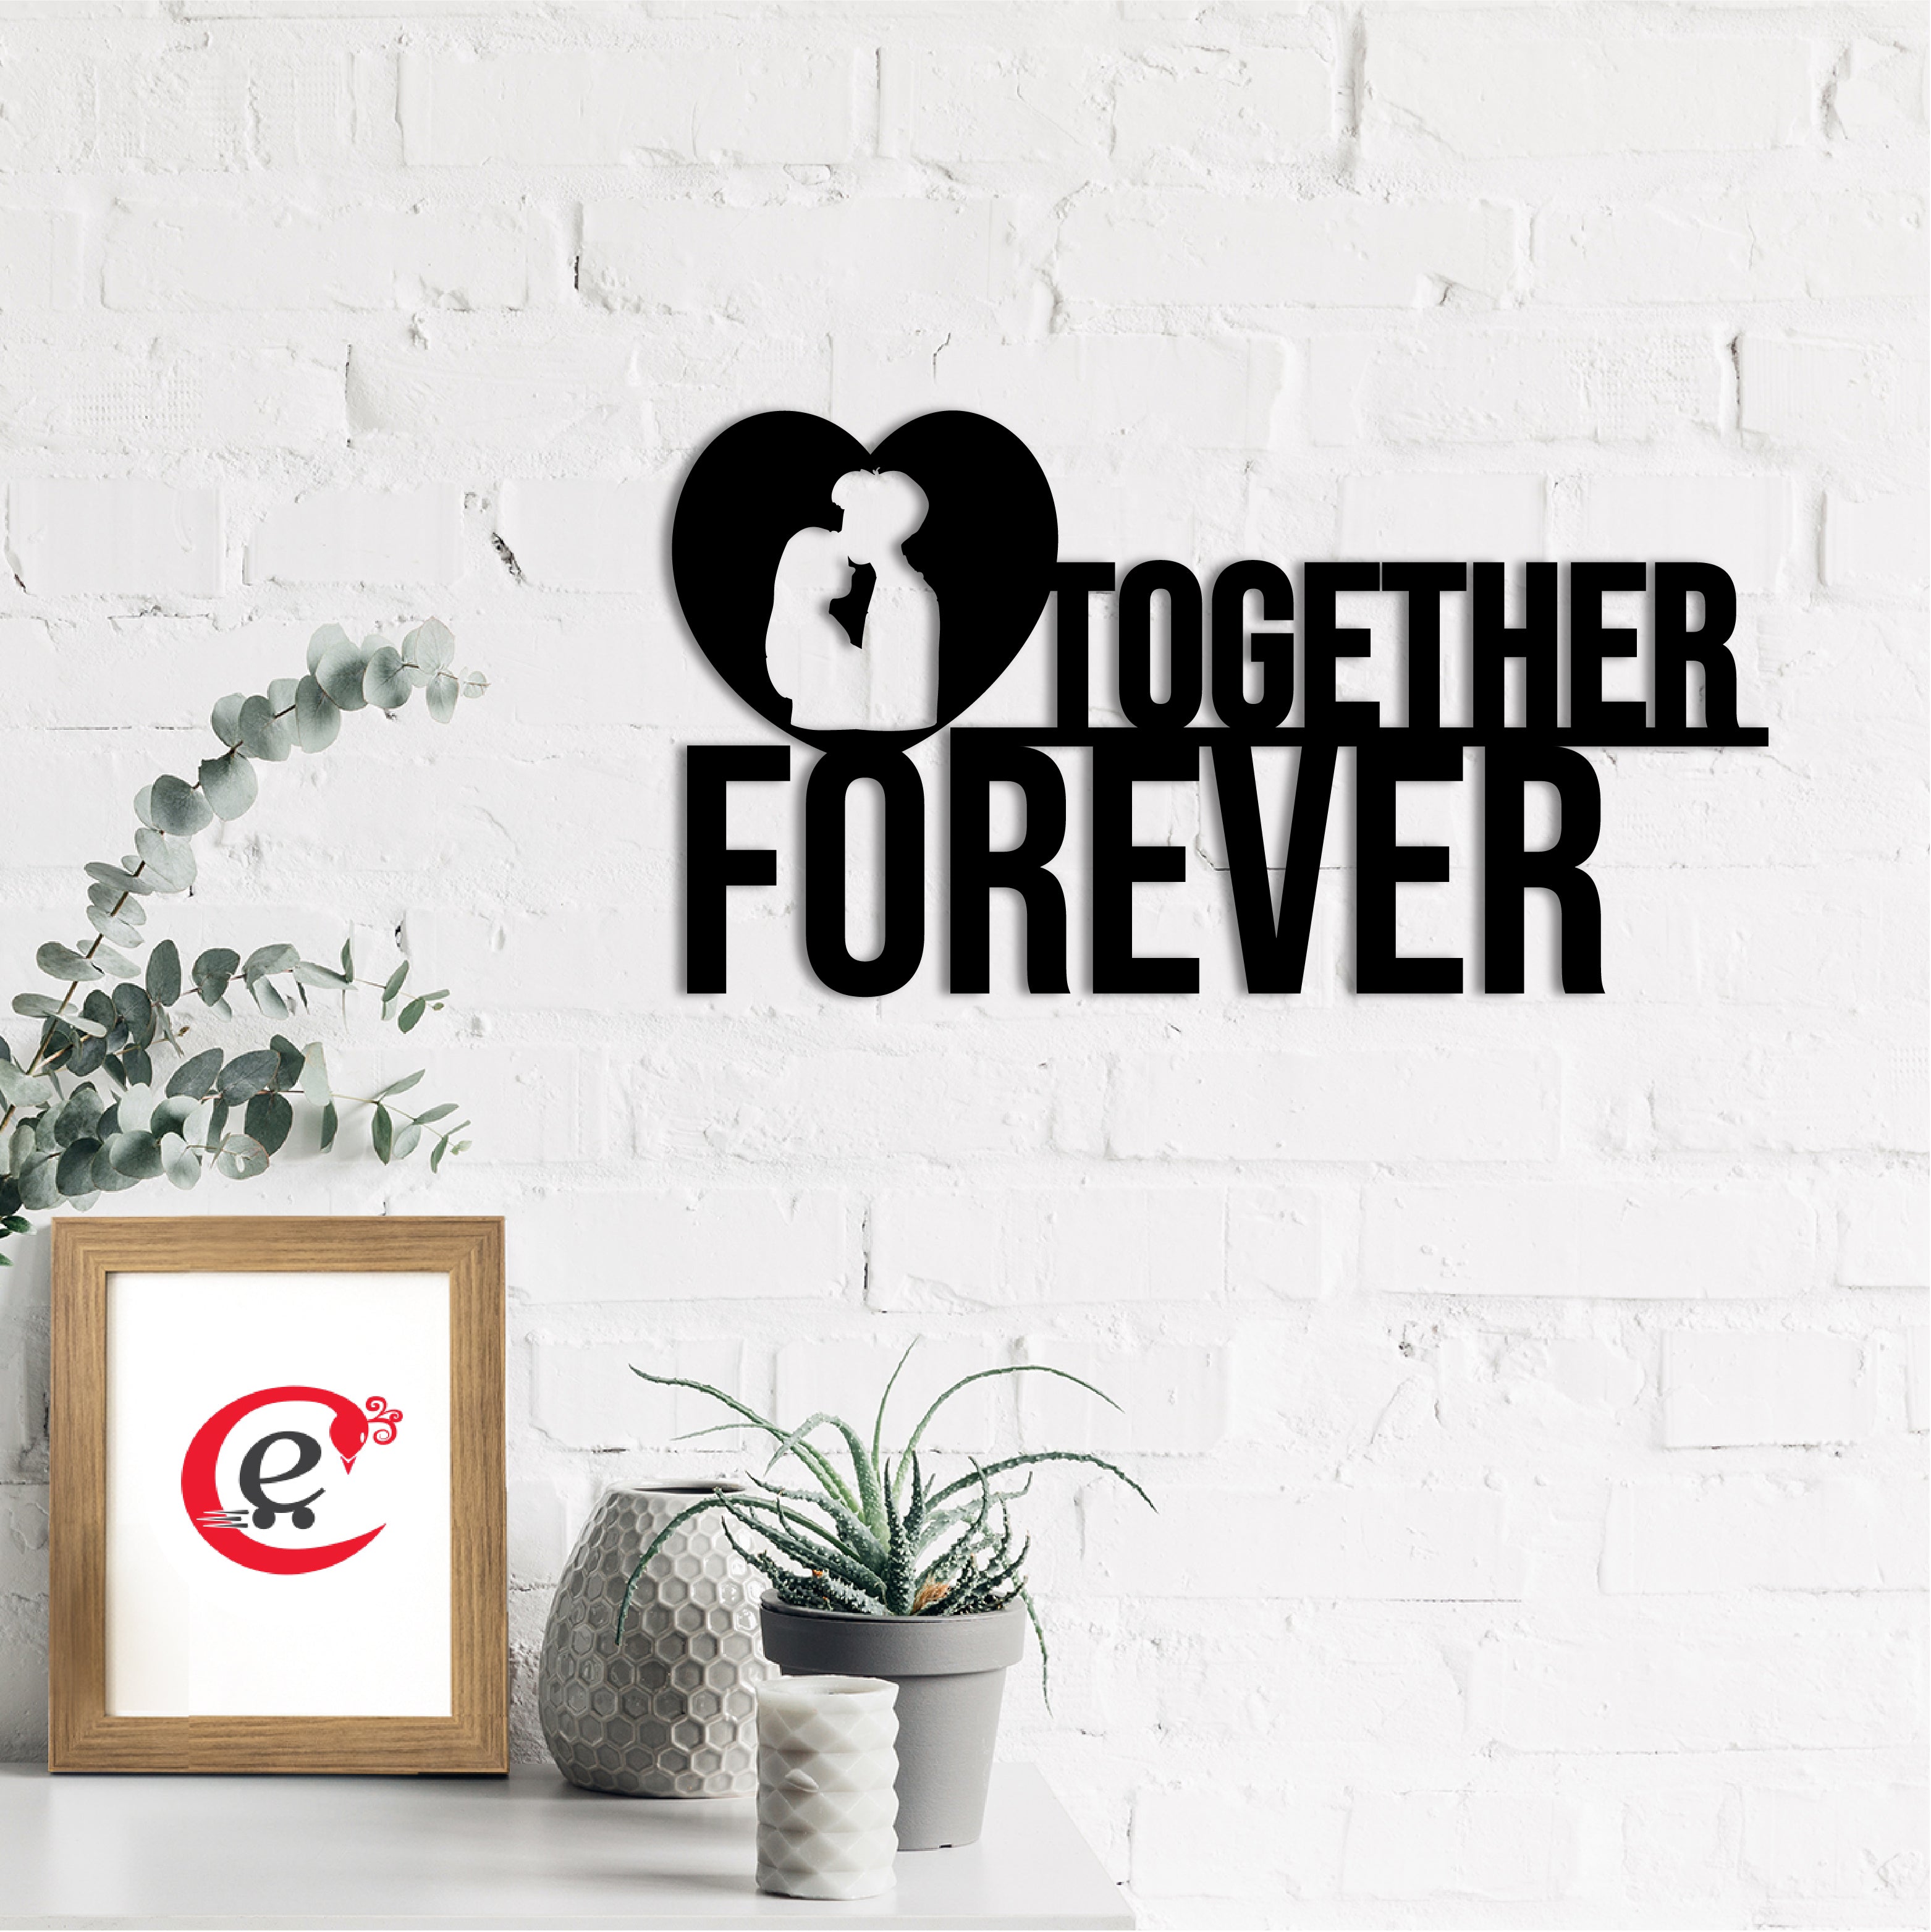 "Together Forever" Black Engineered Wood Wall Art Cutout, Ready to Hang Home Decor